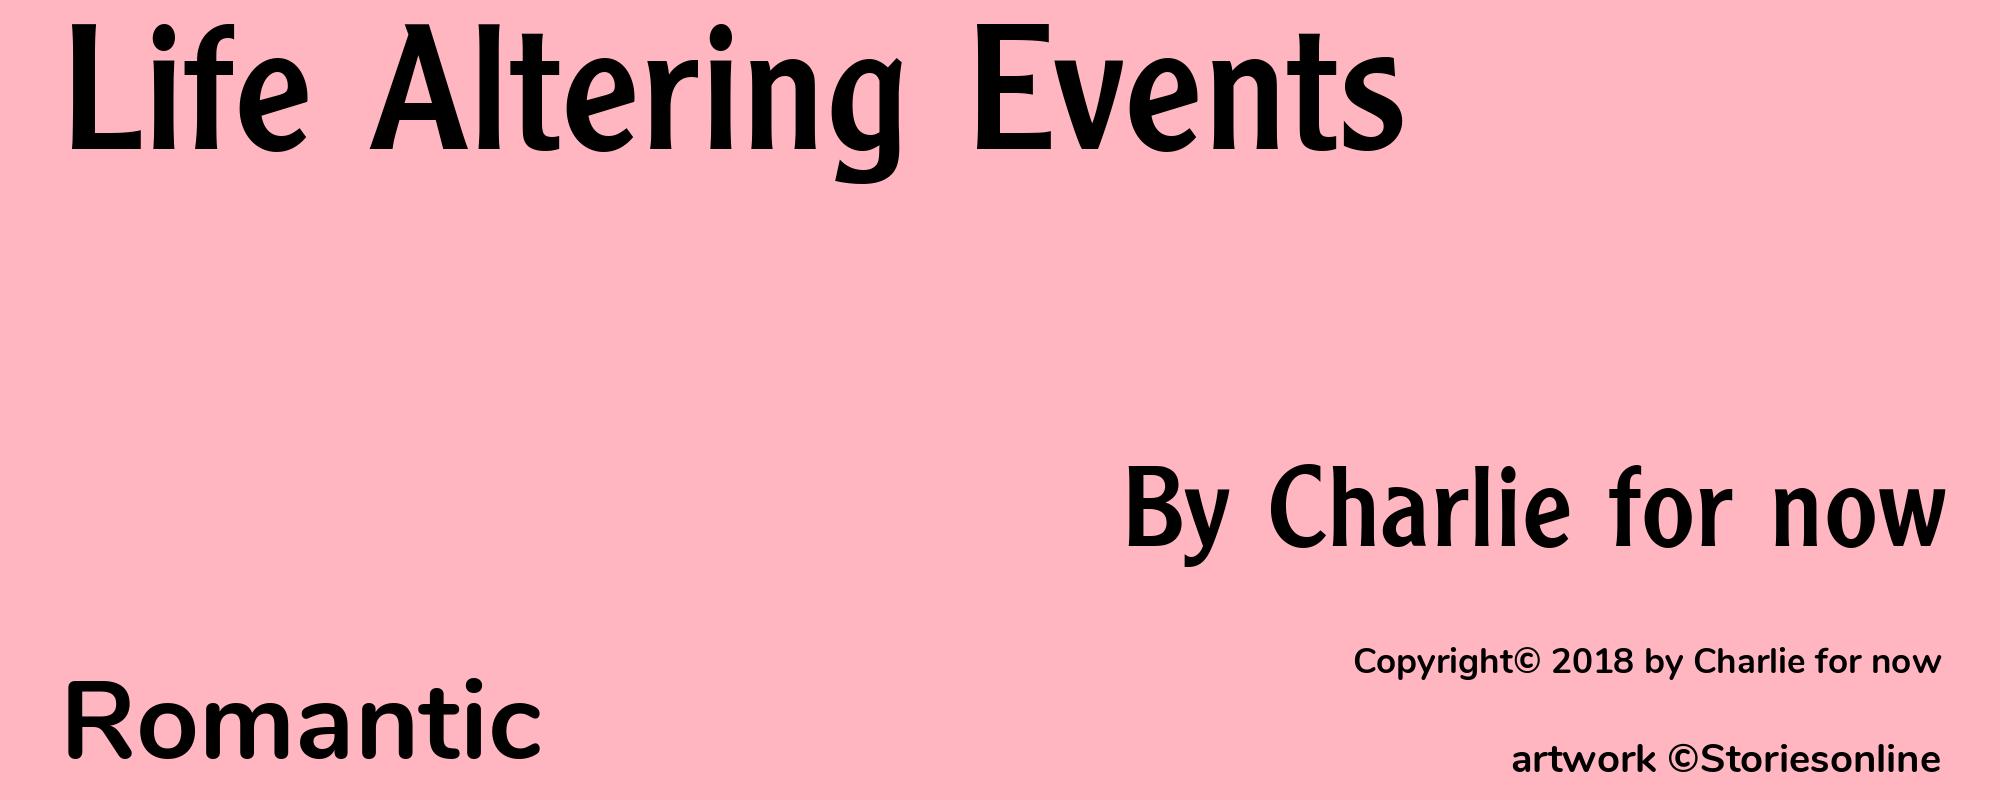 Life Altering Events - Cover